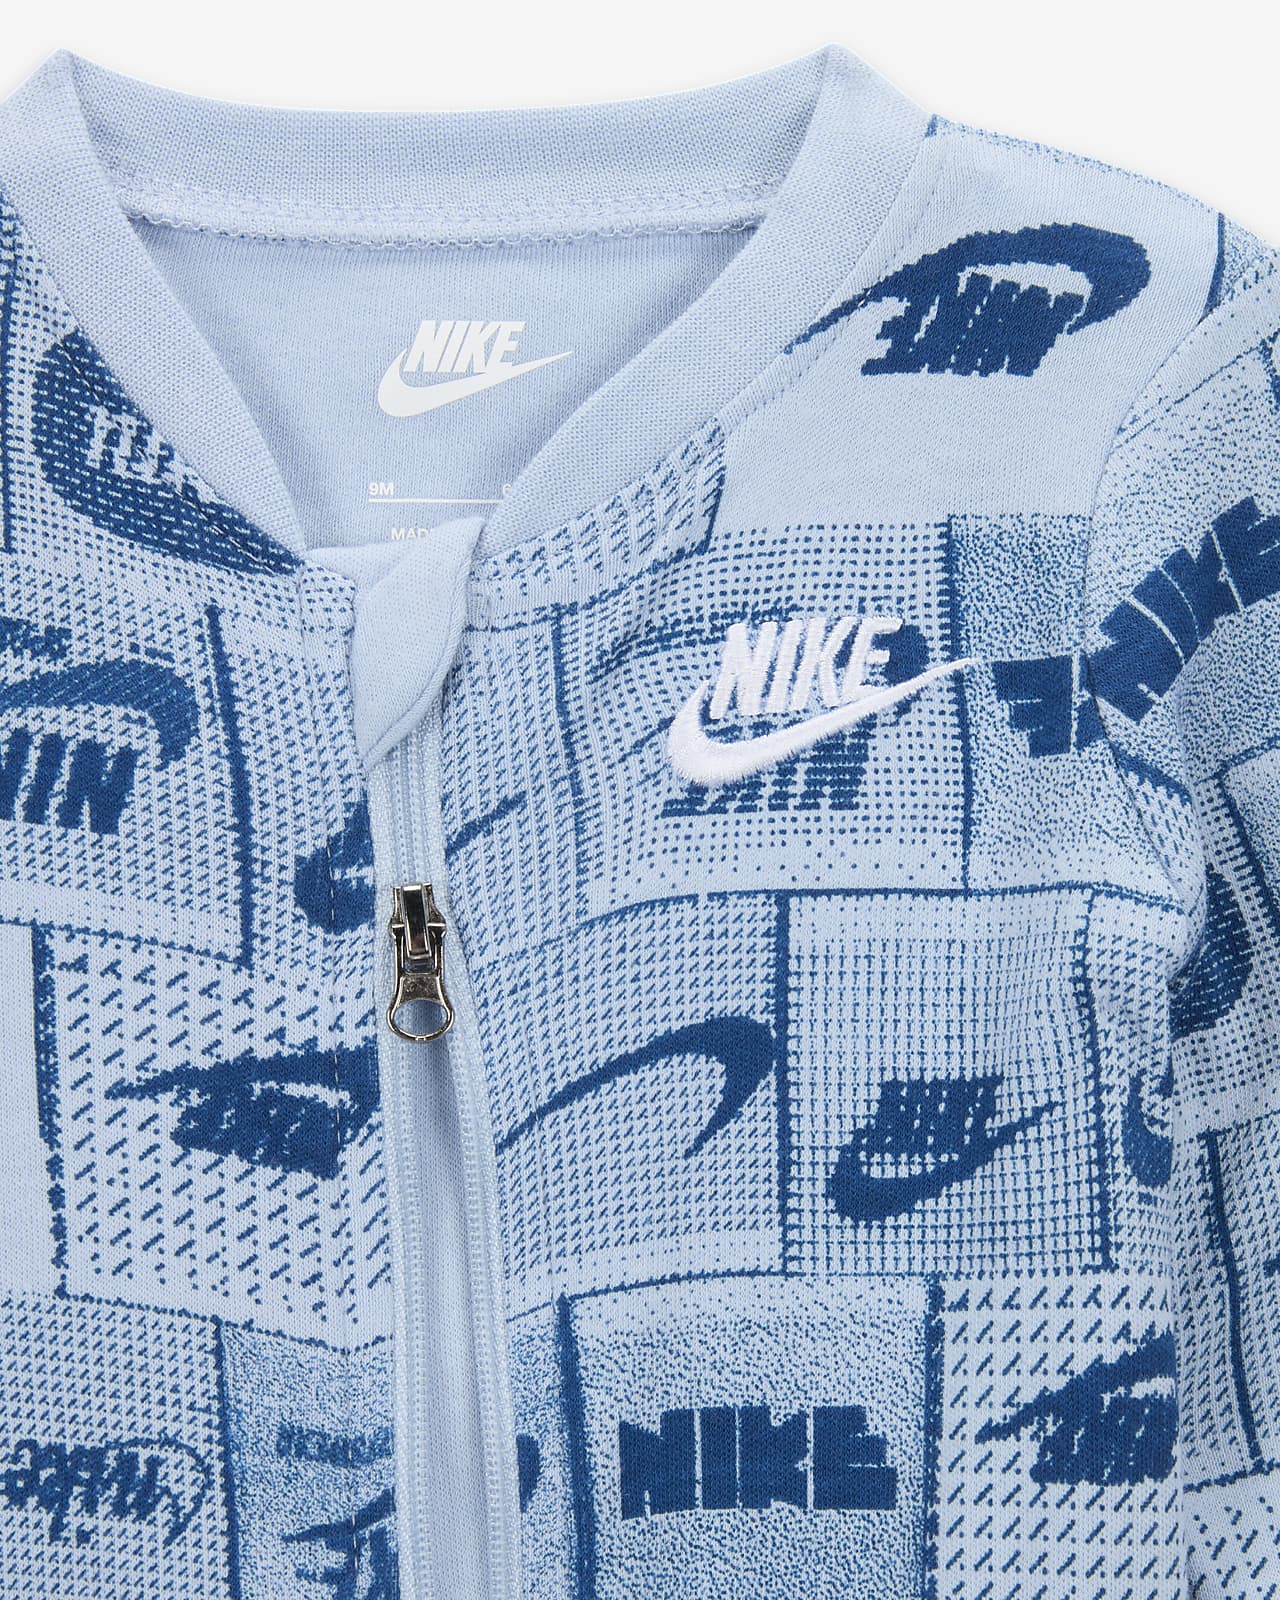 Nike Sportswear Club Baby (0-9M) Footed Coverall.